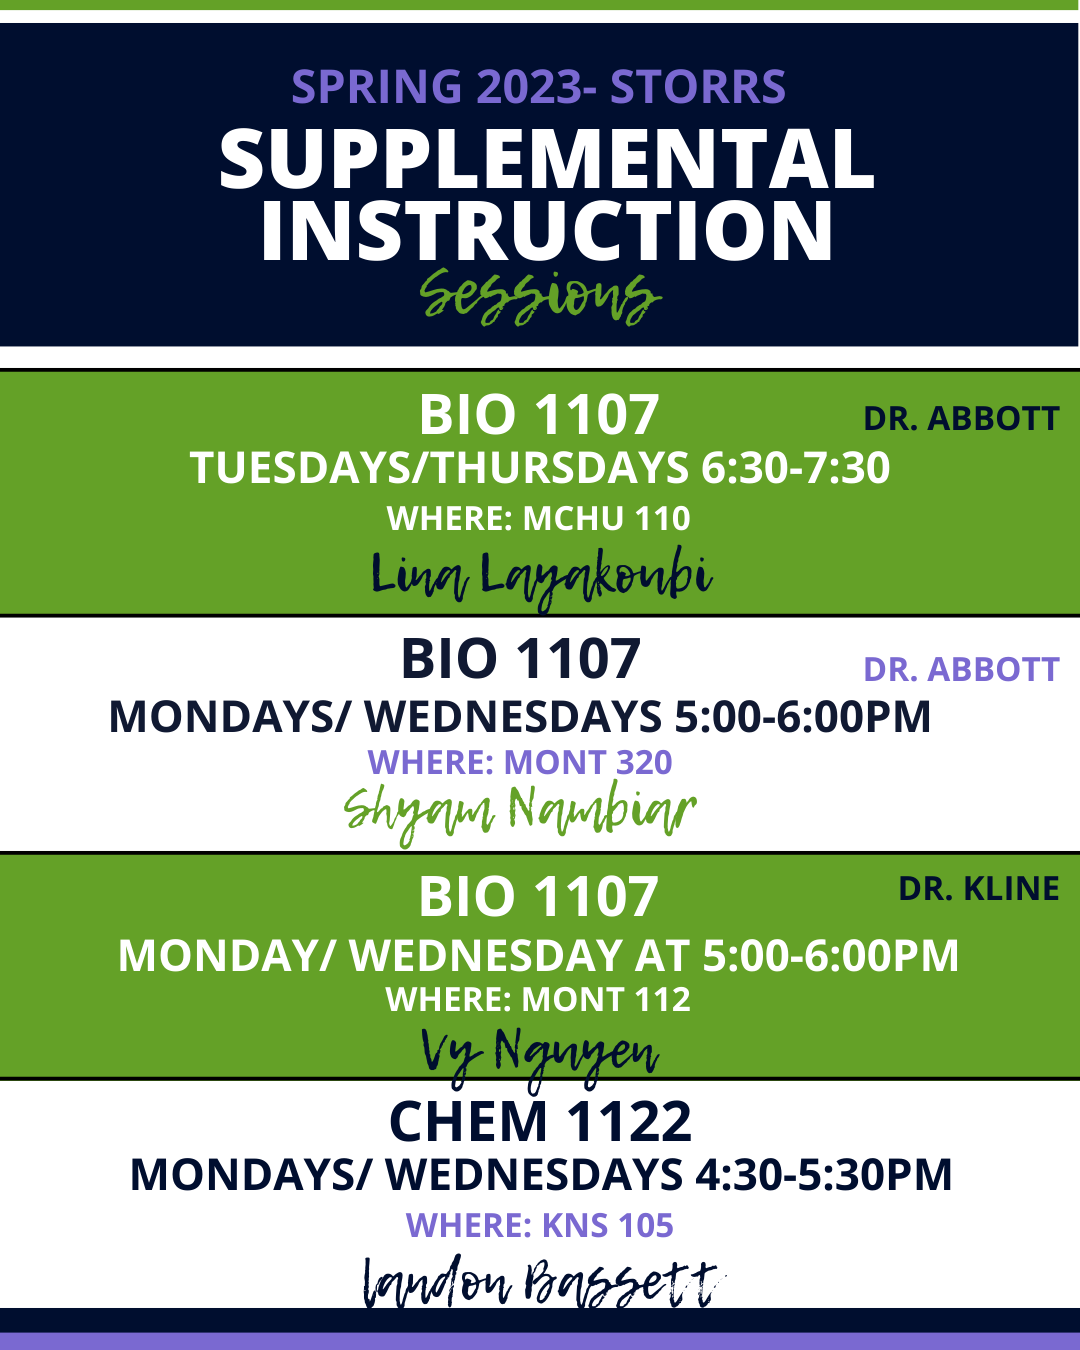 Spring 2023 Supplemental Instruction Sessions